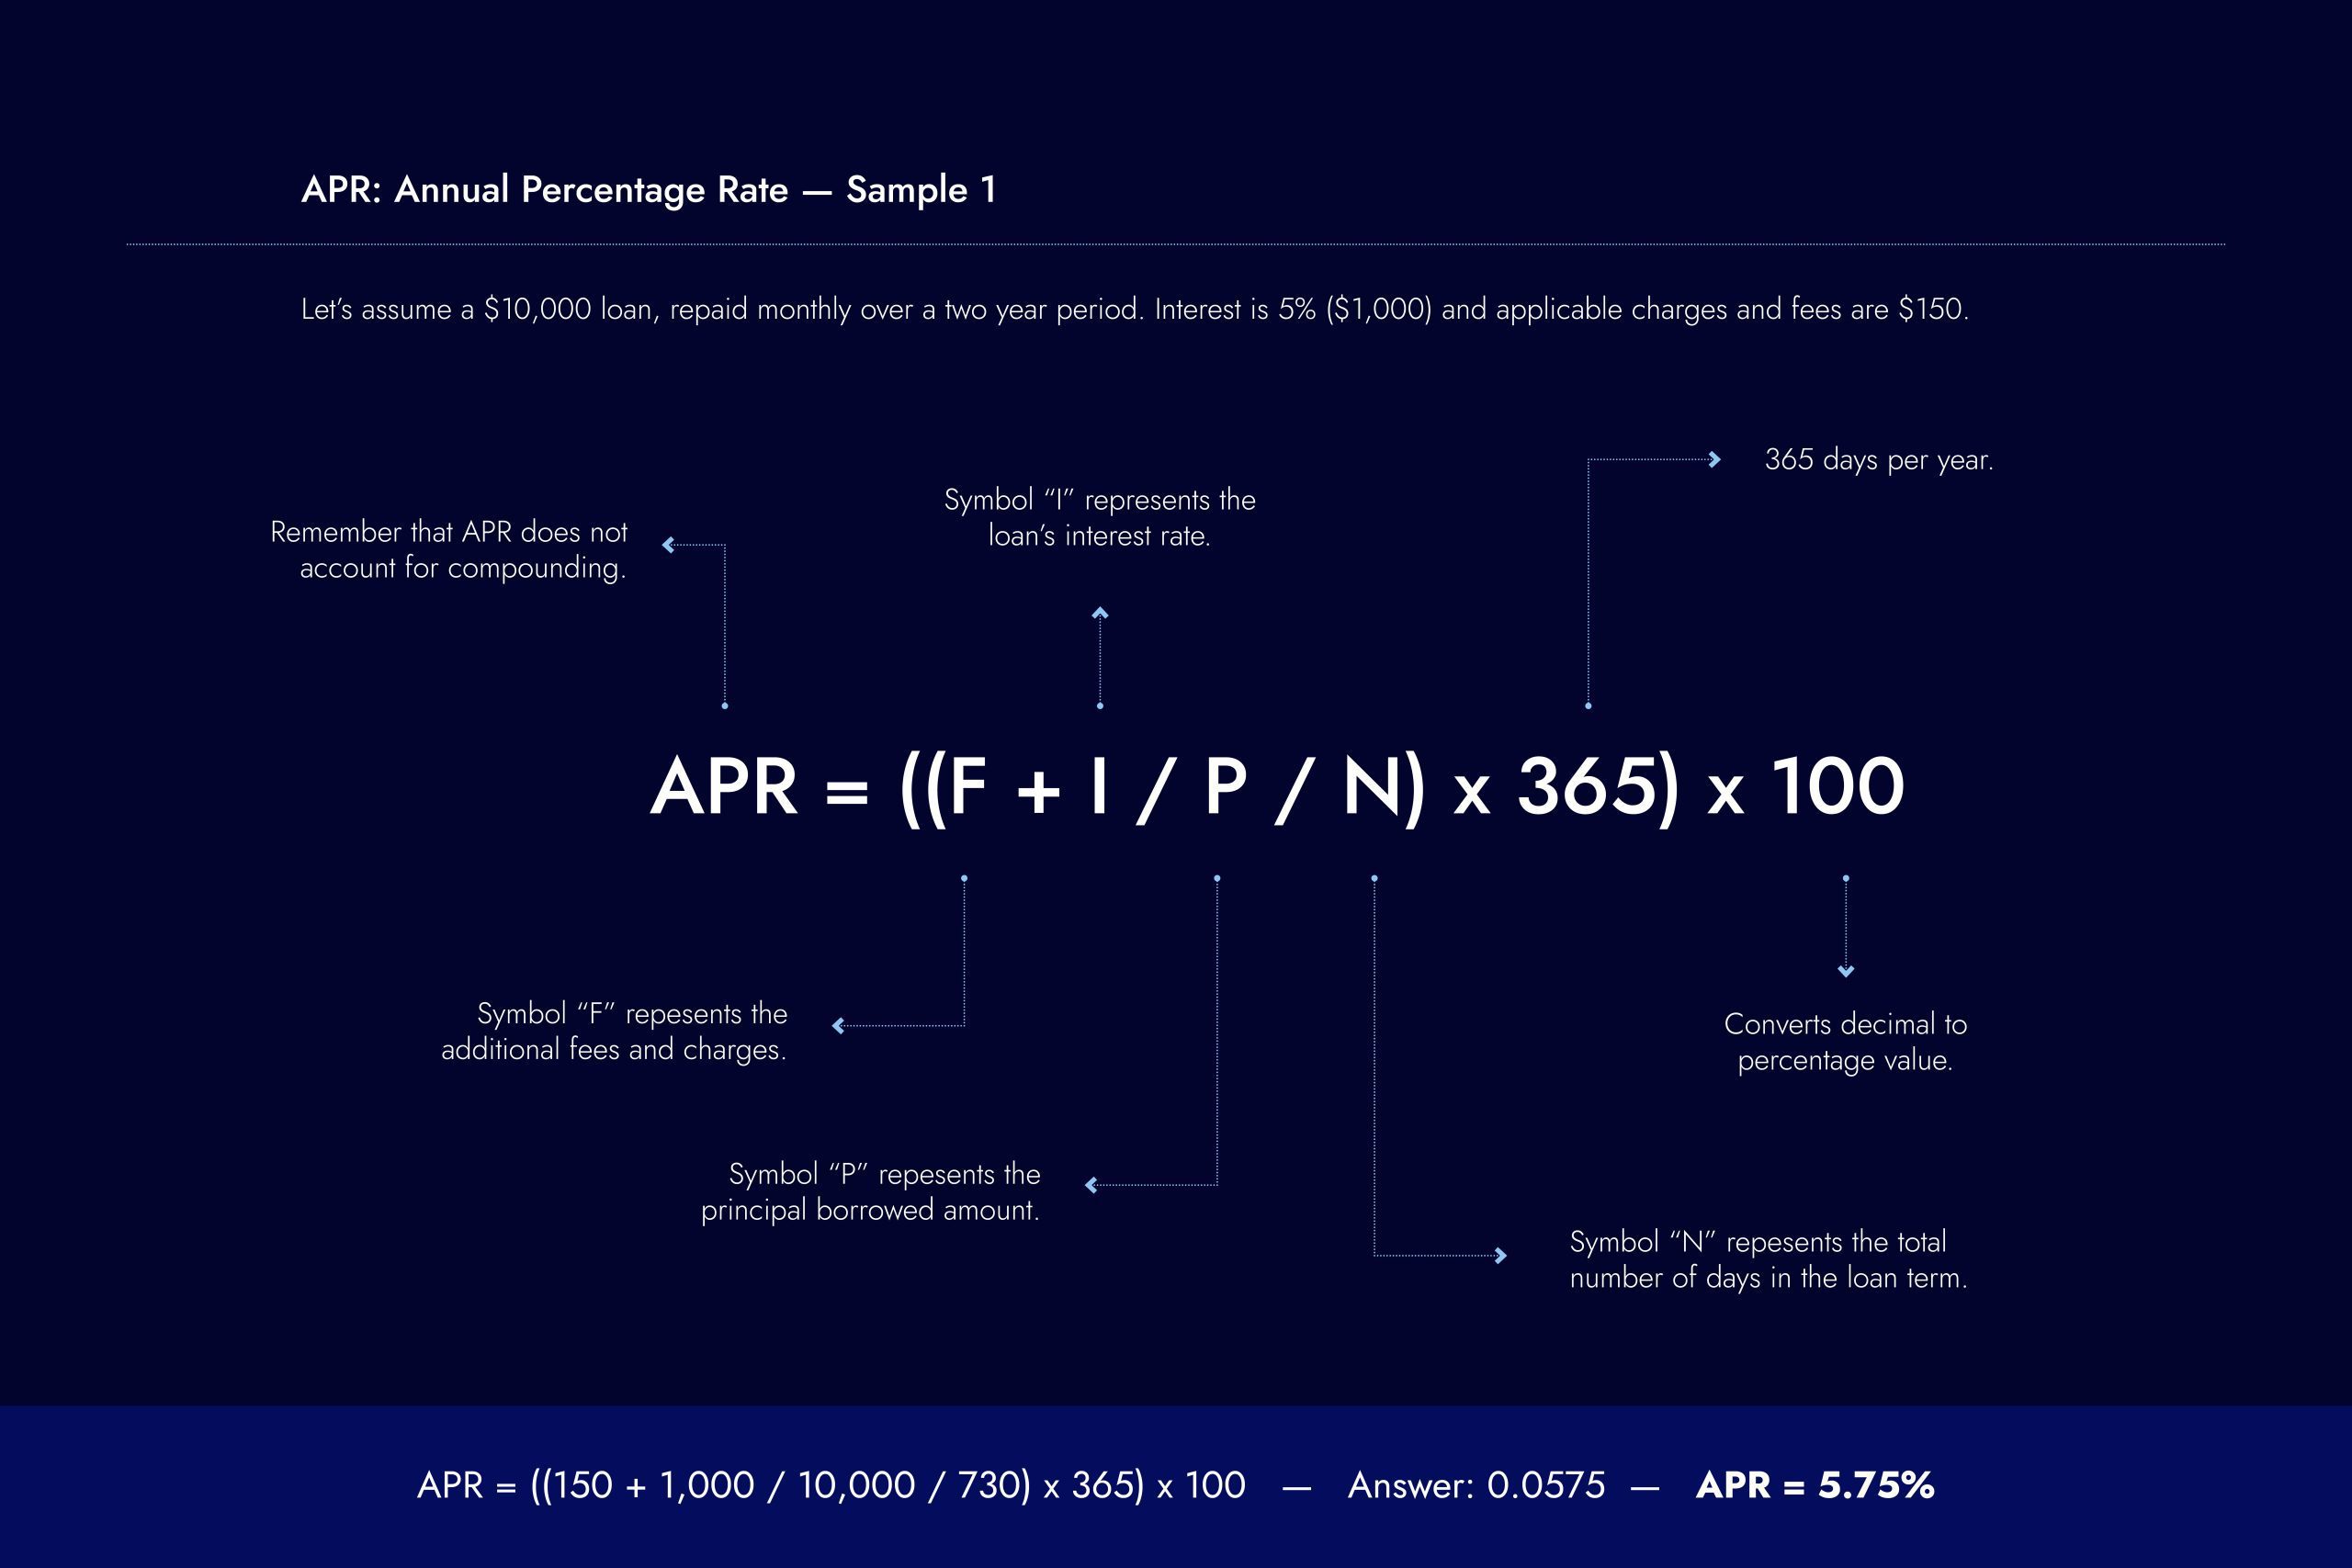 A visual outline of an Annual Percentage Rate calculation formula.